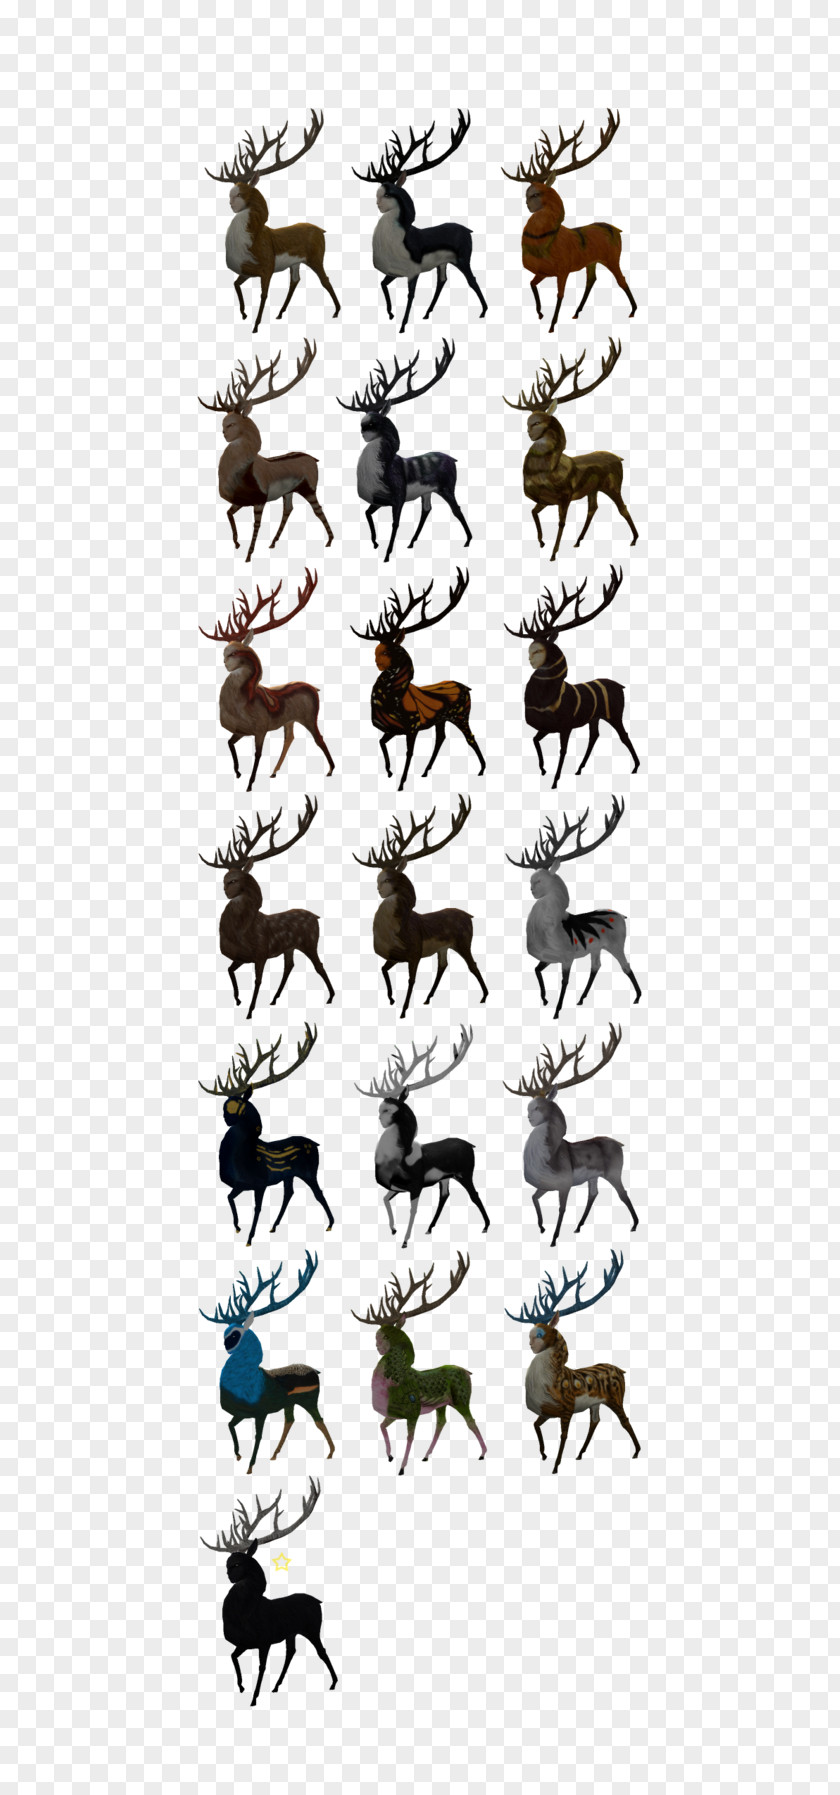 Forest Animal The Endless Deer Fur Antler Insect PNG